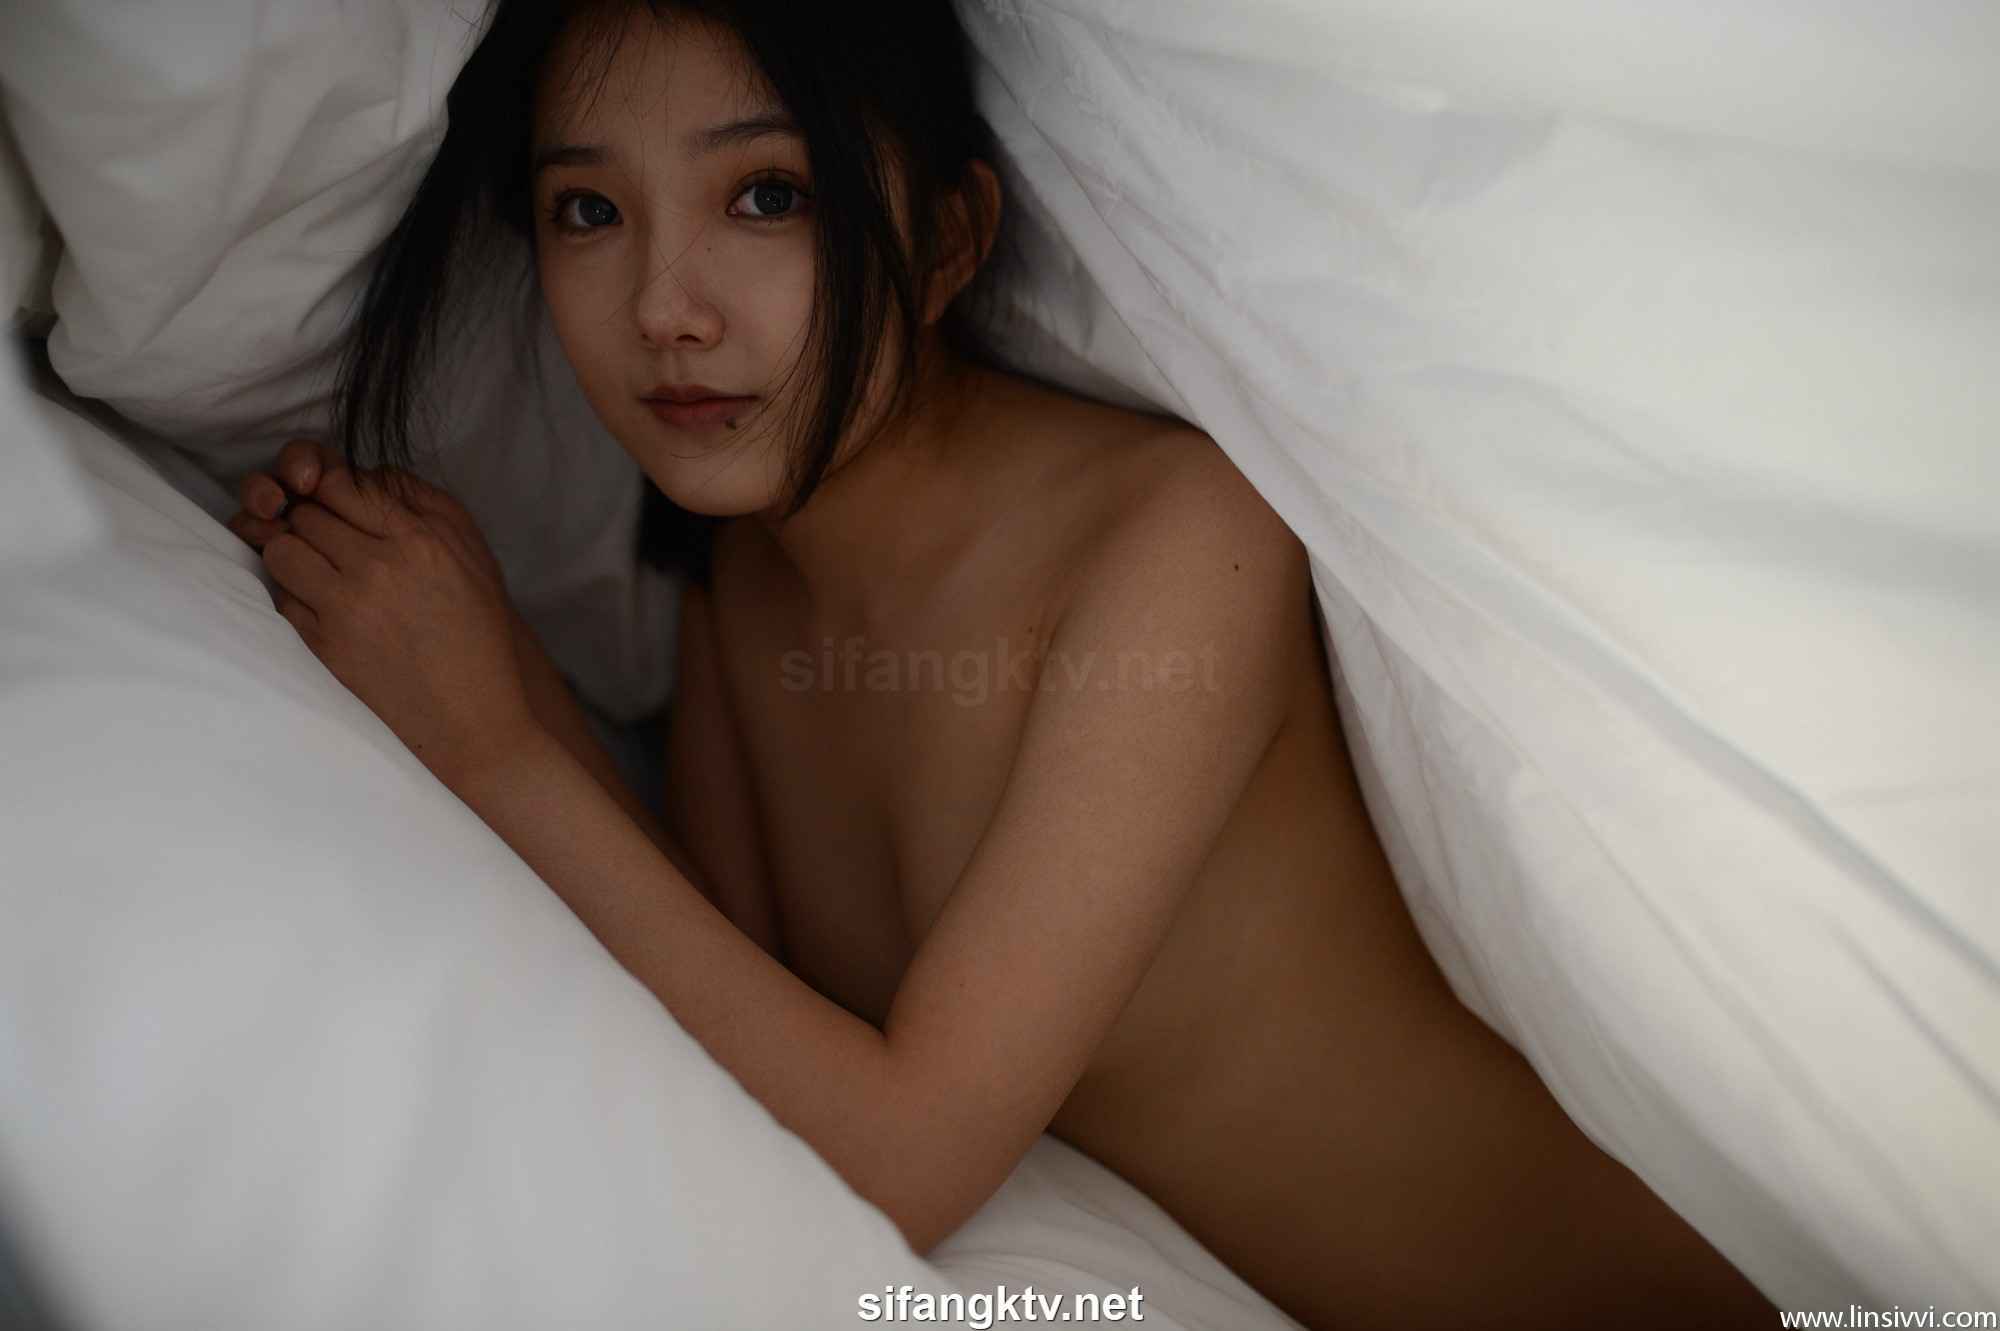 Internal information of Xiwei Society [Xiaoxin] Brushed vaginal discharge, close-up, private shooting - bed sheets